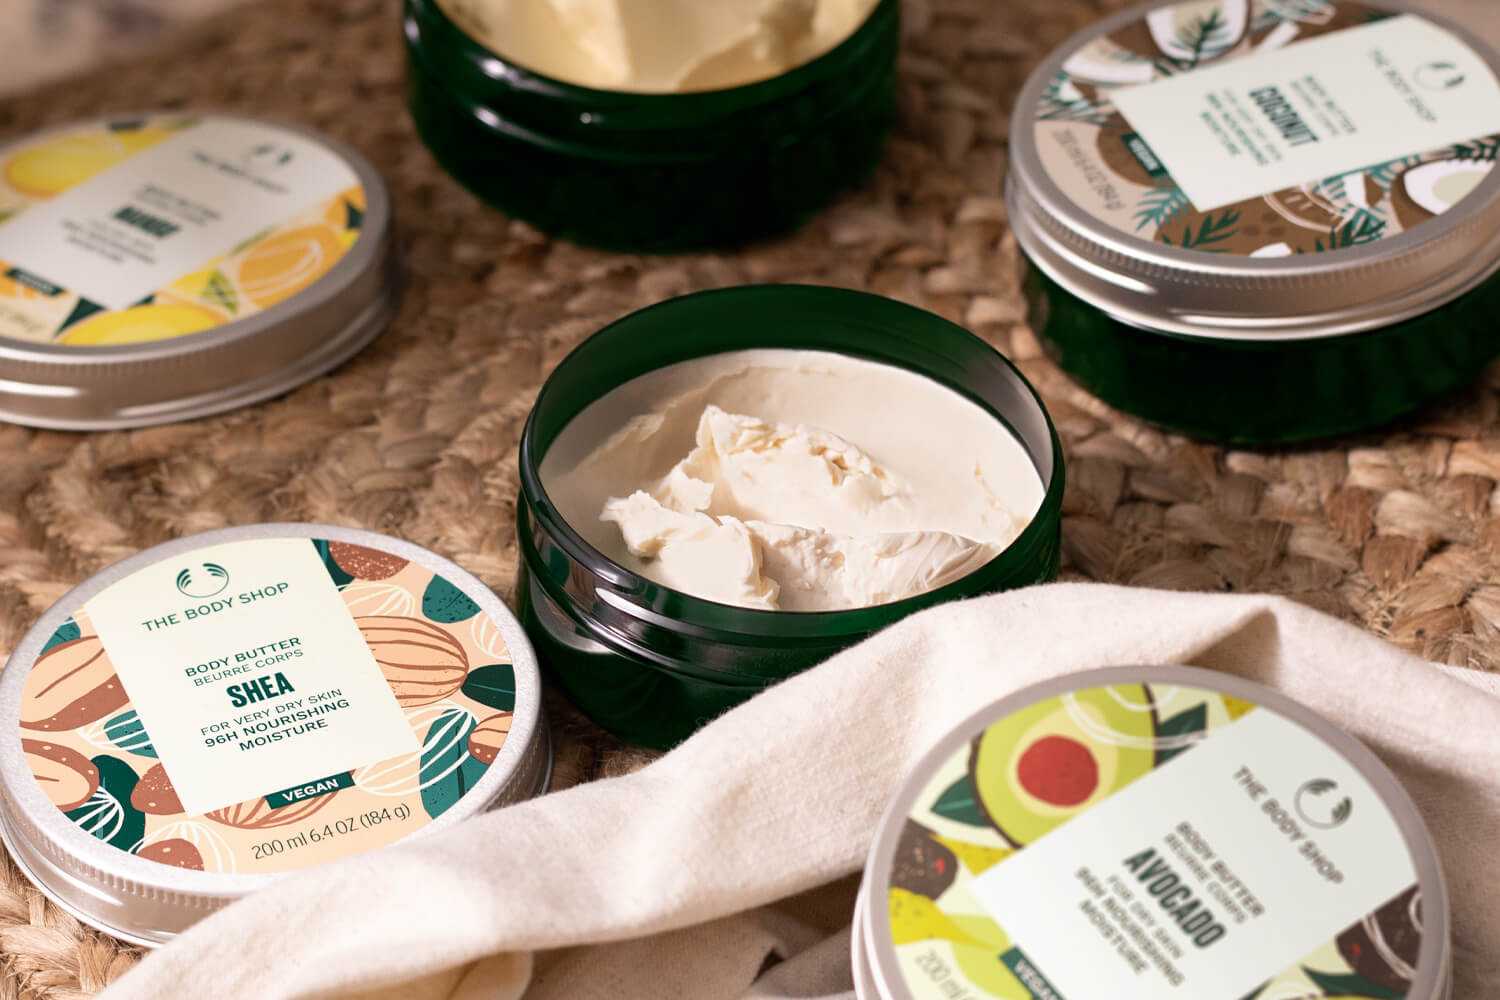 The Body Shop - Re-discover the ethical beauty brand